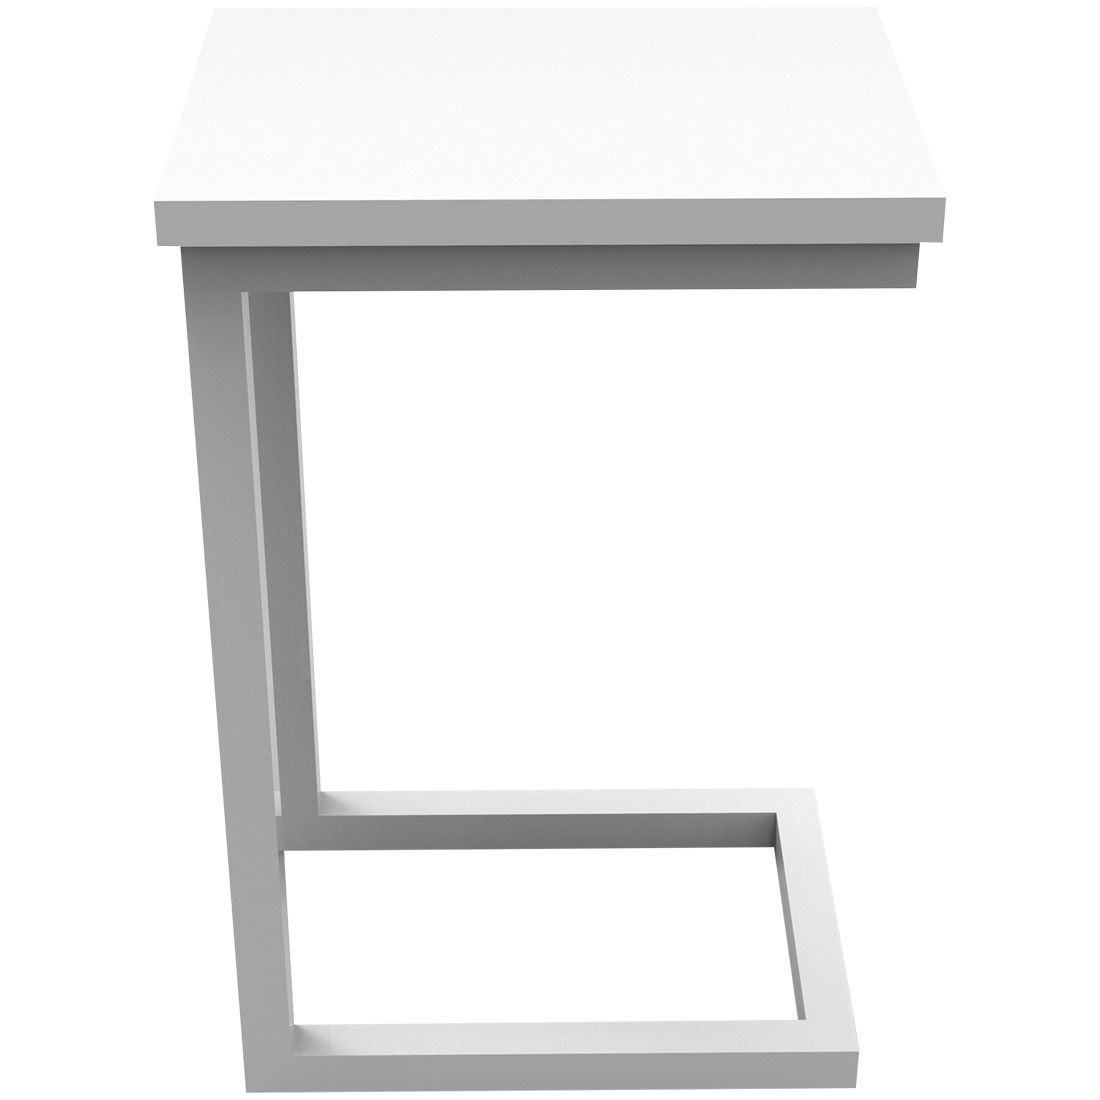 Eternity Side Table - switchoffice.com.au